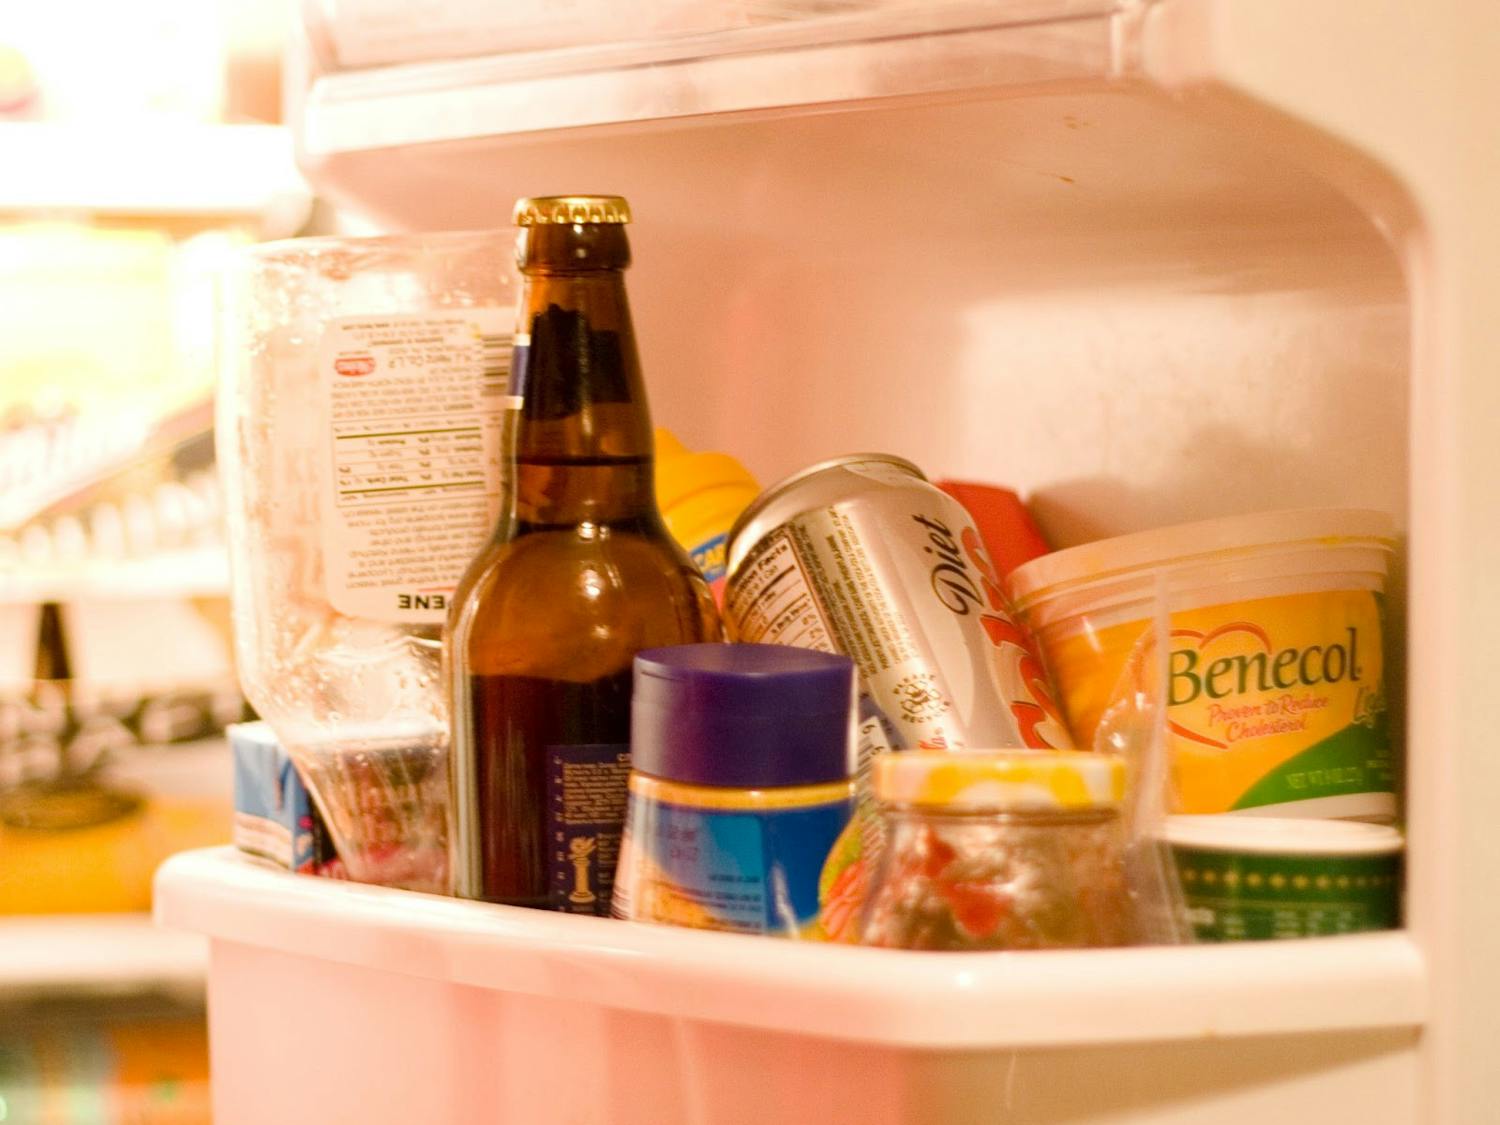 There are simple ways that help you get things out of the fridge and enjoy a nice meal or snack. (Photo courtesy of Flickr/“Fridge” by Sara/April 15, 2006).